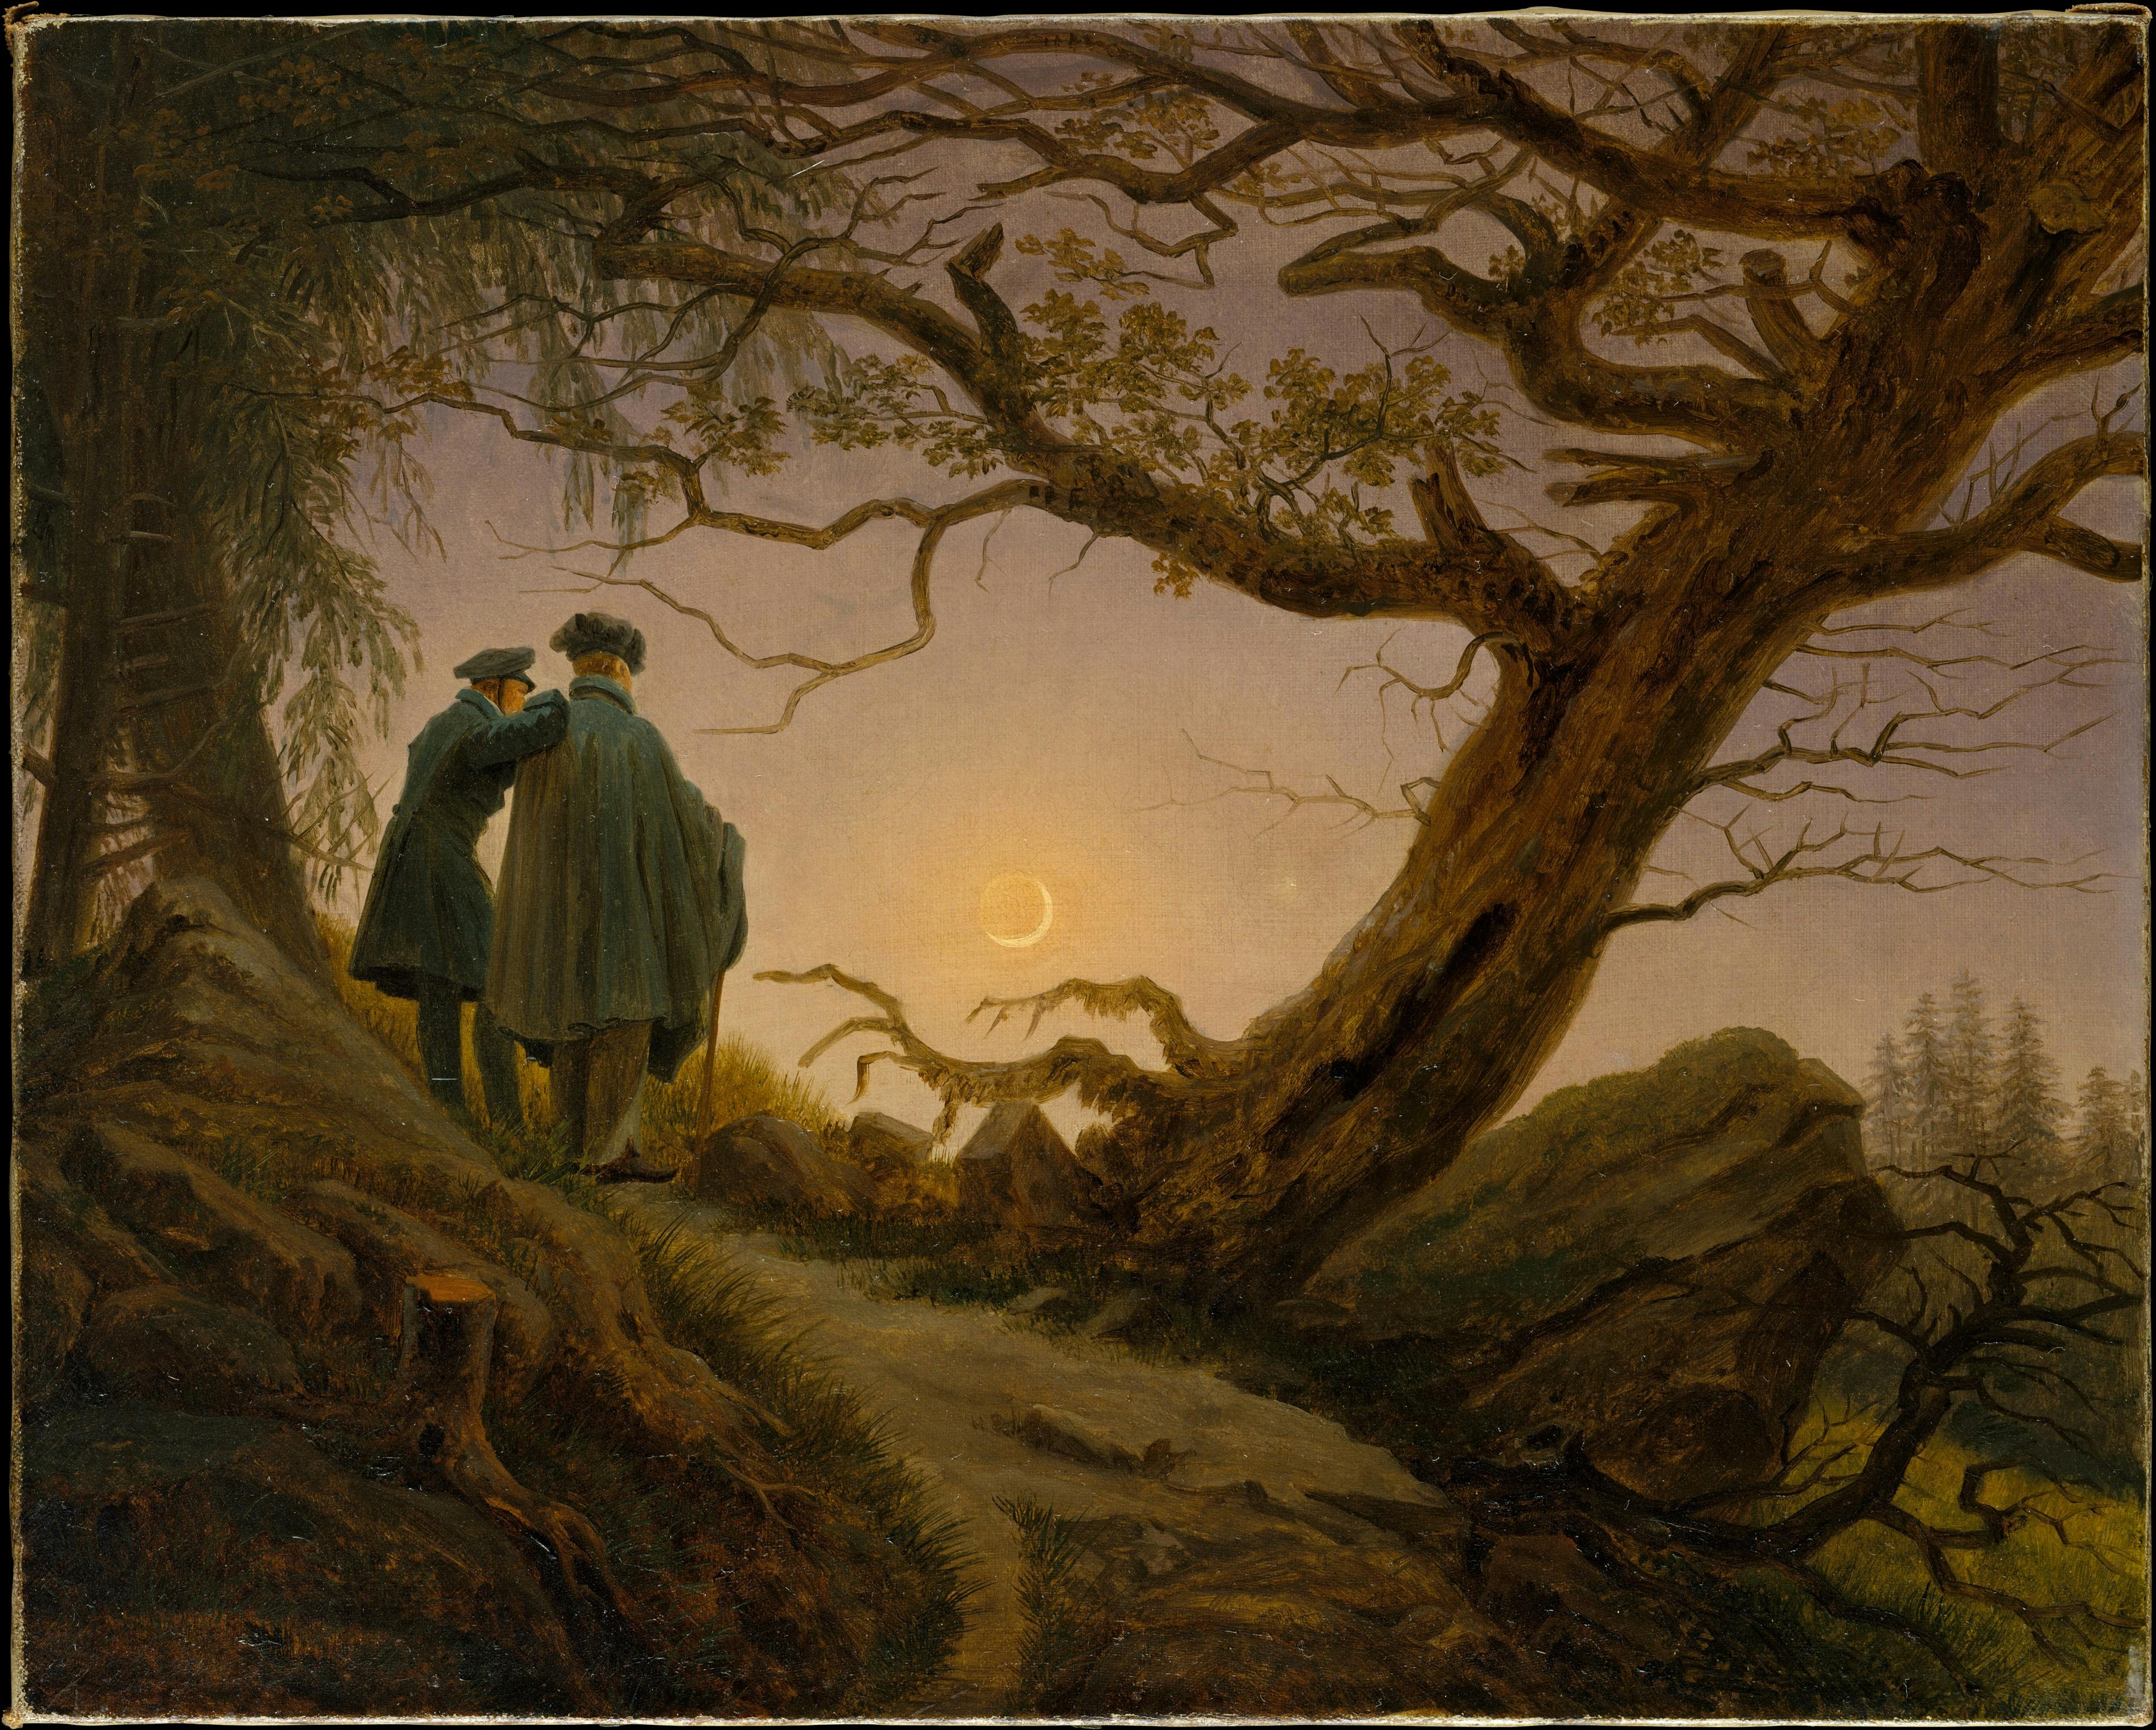 painting of gently lit moonlit forested landscape with two men contemplating the rising moon